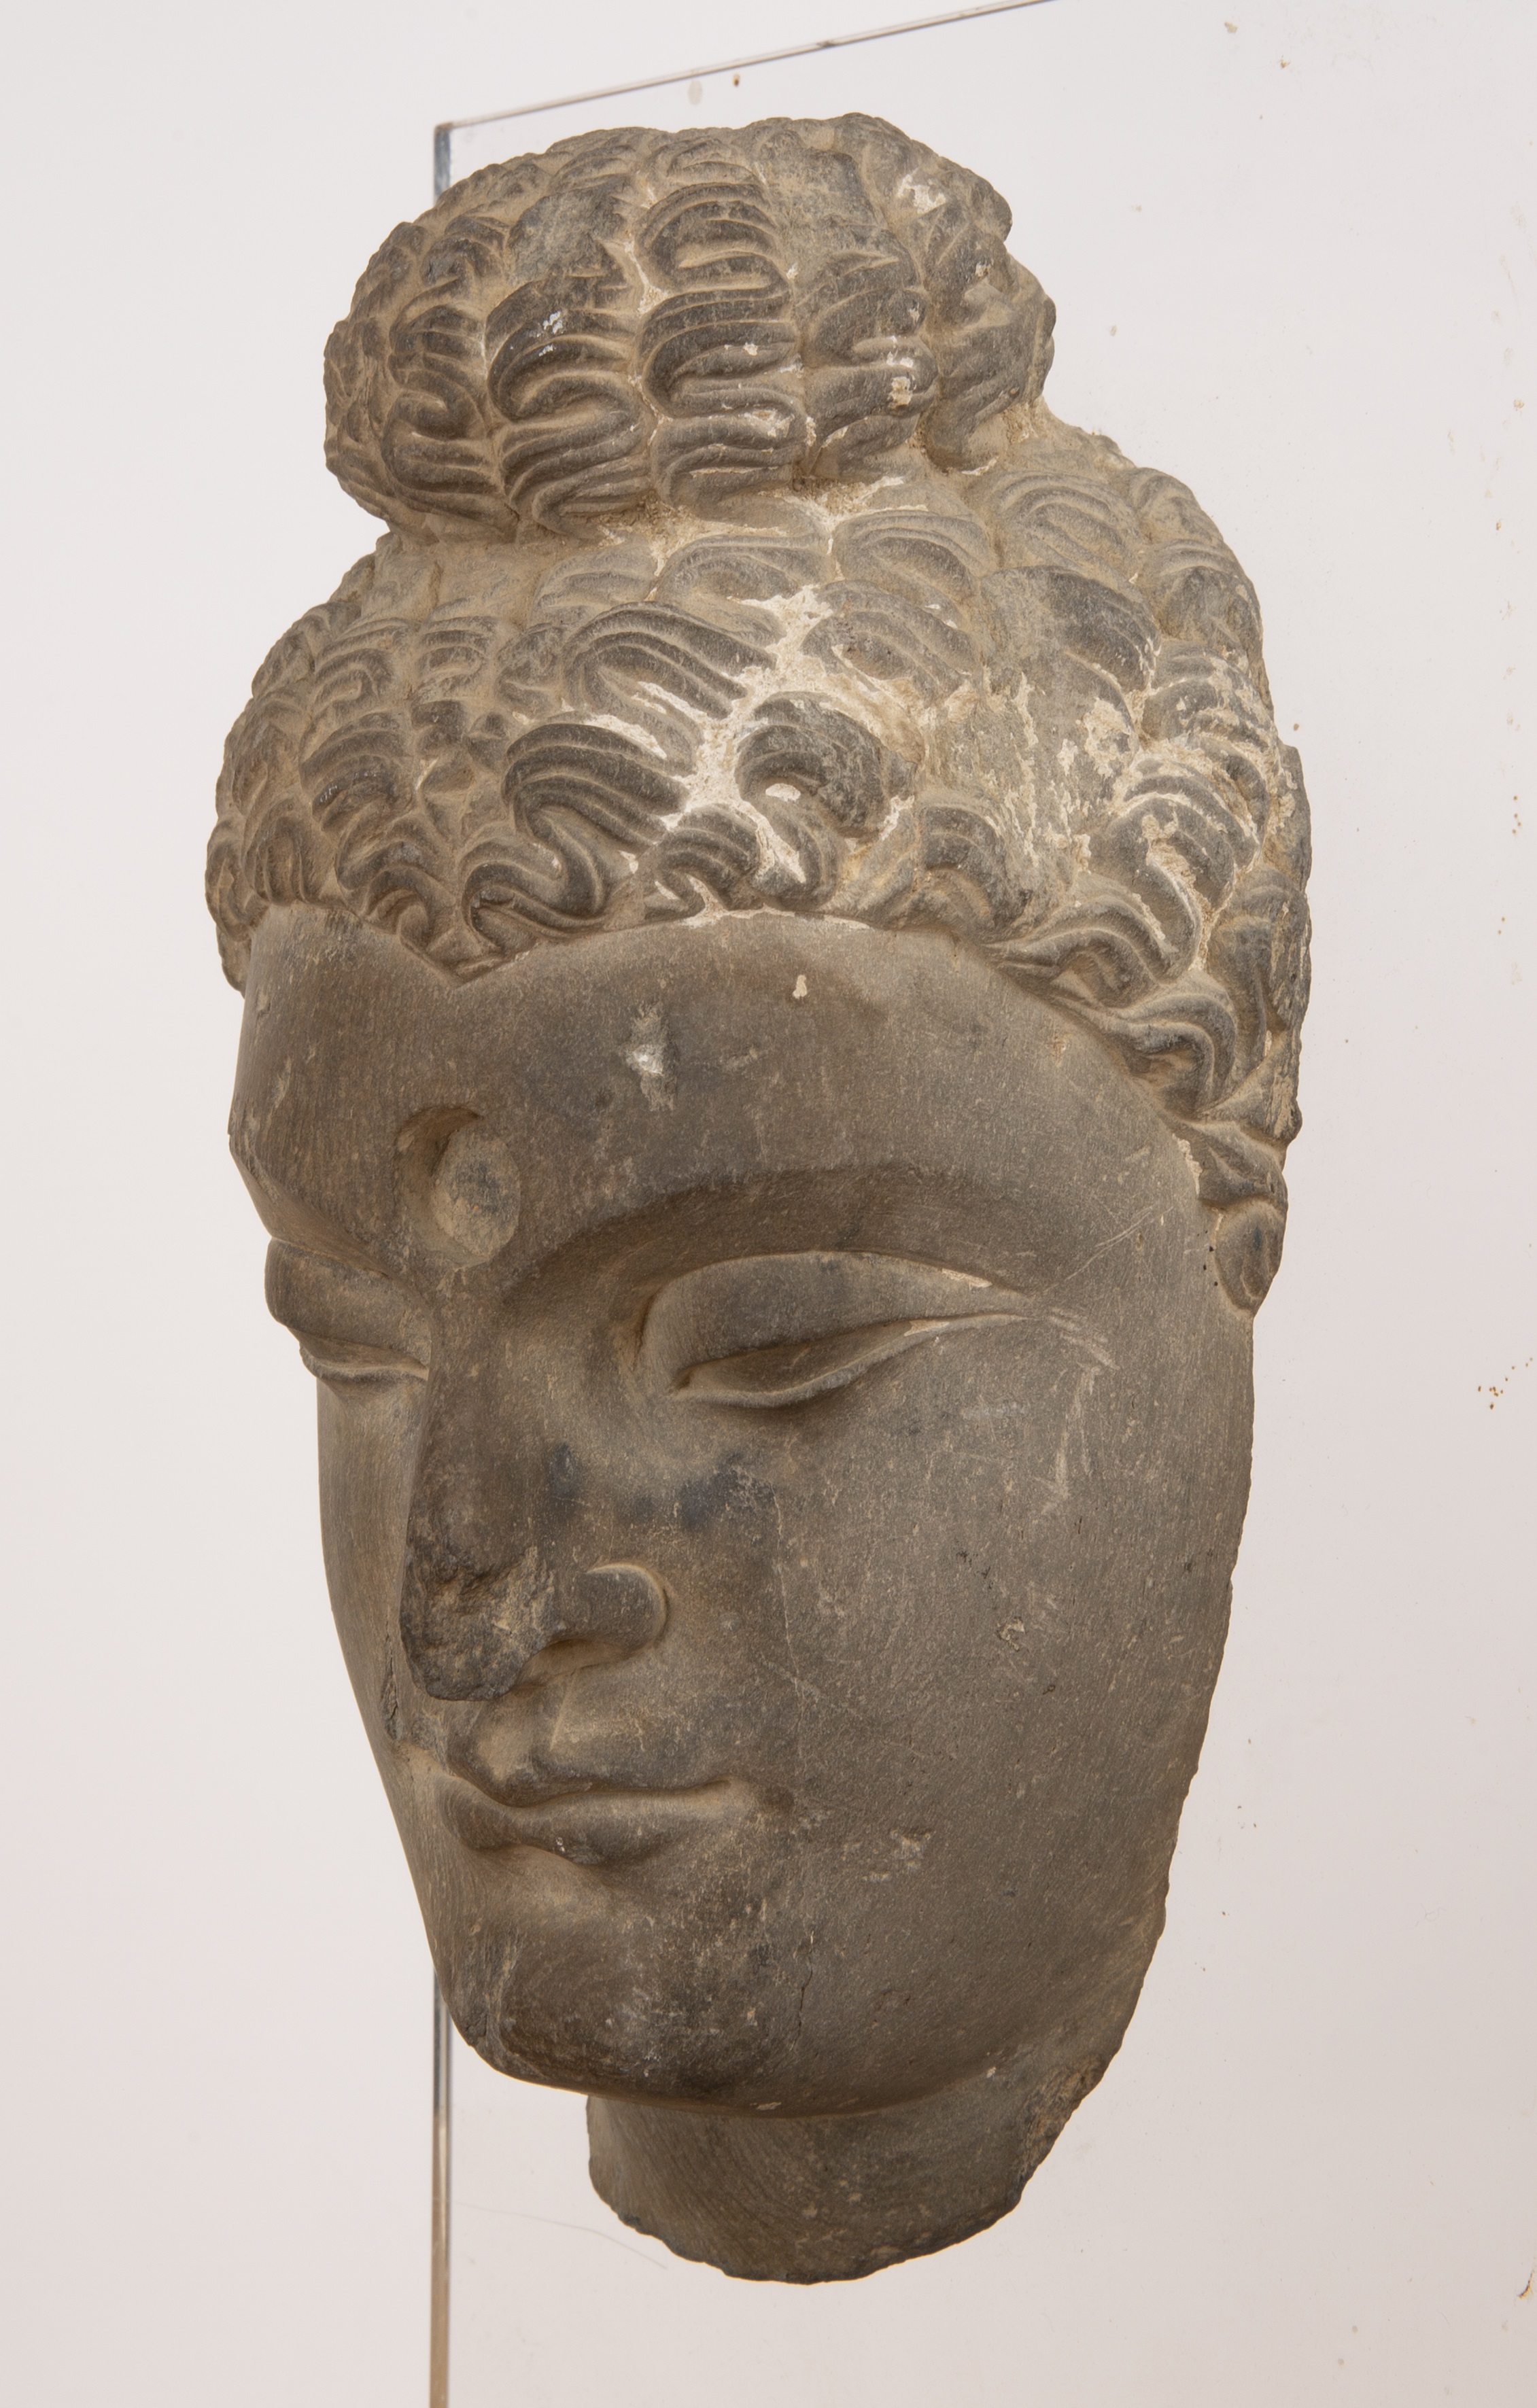 Fragmentary grey carved schist head of Buddha Indian, ancient region of Gandhara, 3rd-4th Century - Image 6 of 9